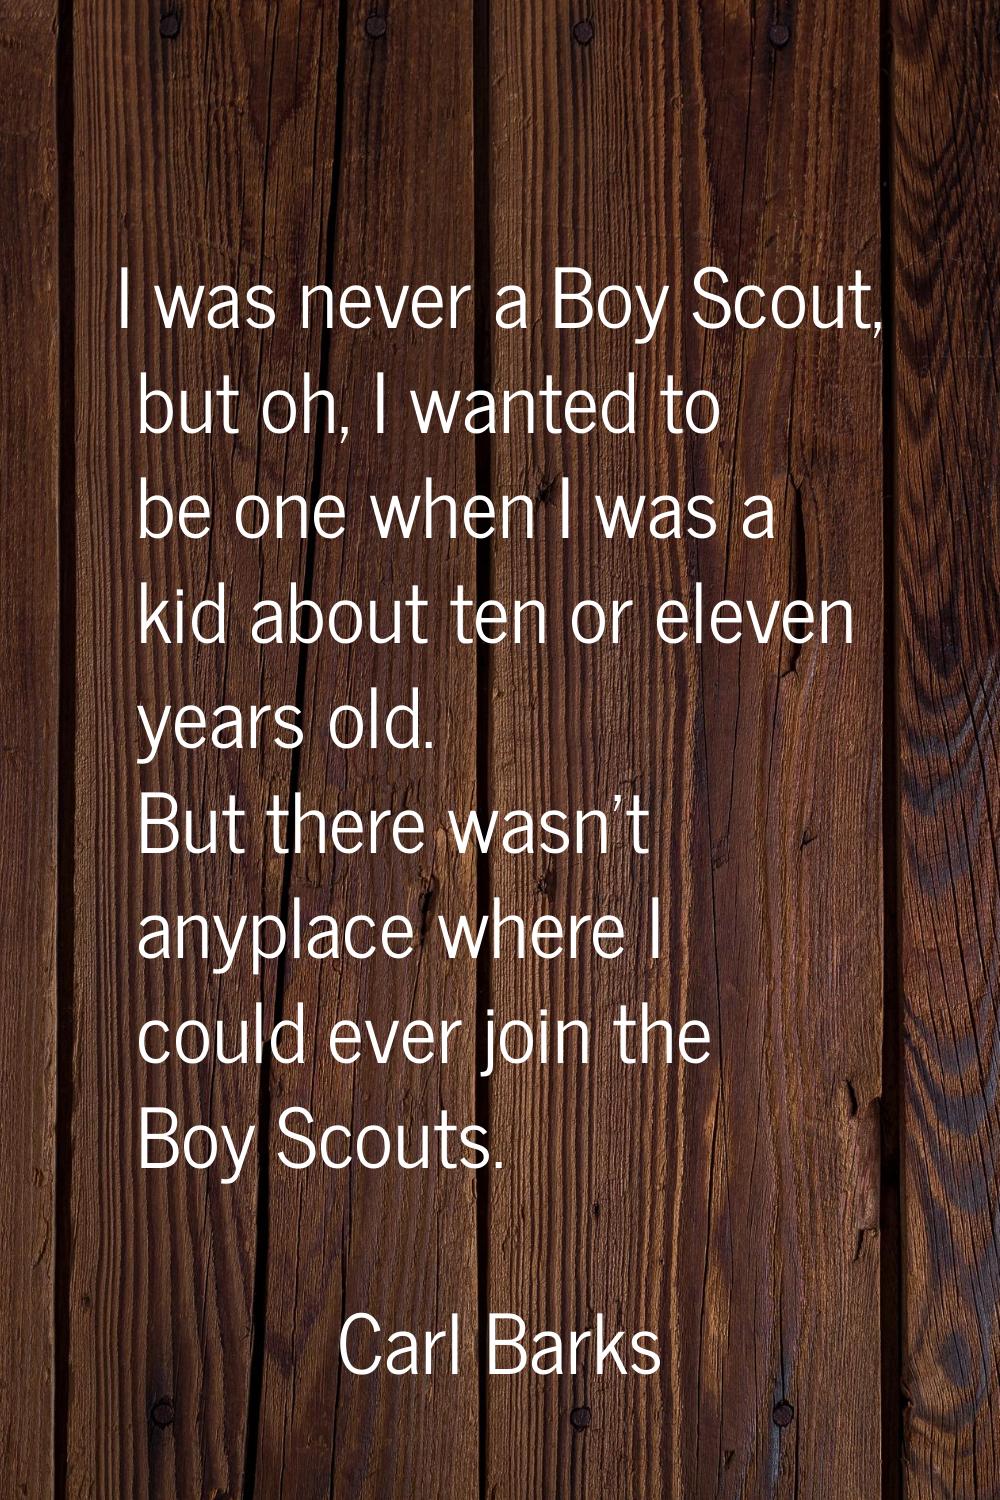 I was never a Boy Scout, but oh, I wanted to be one when I was a kid about ten or eleven years old.